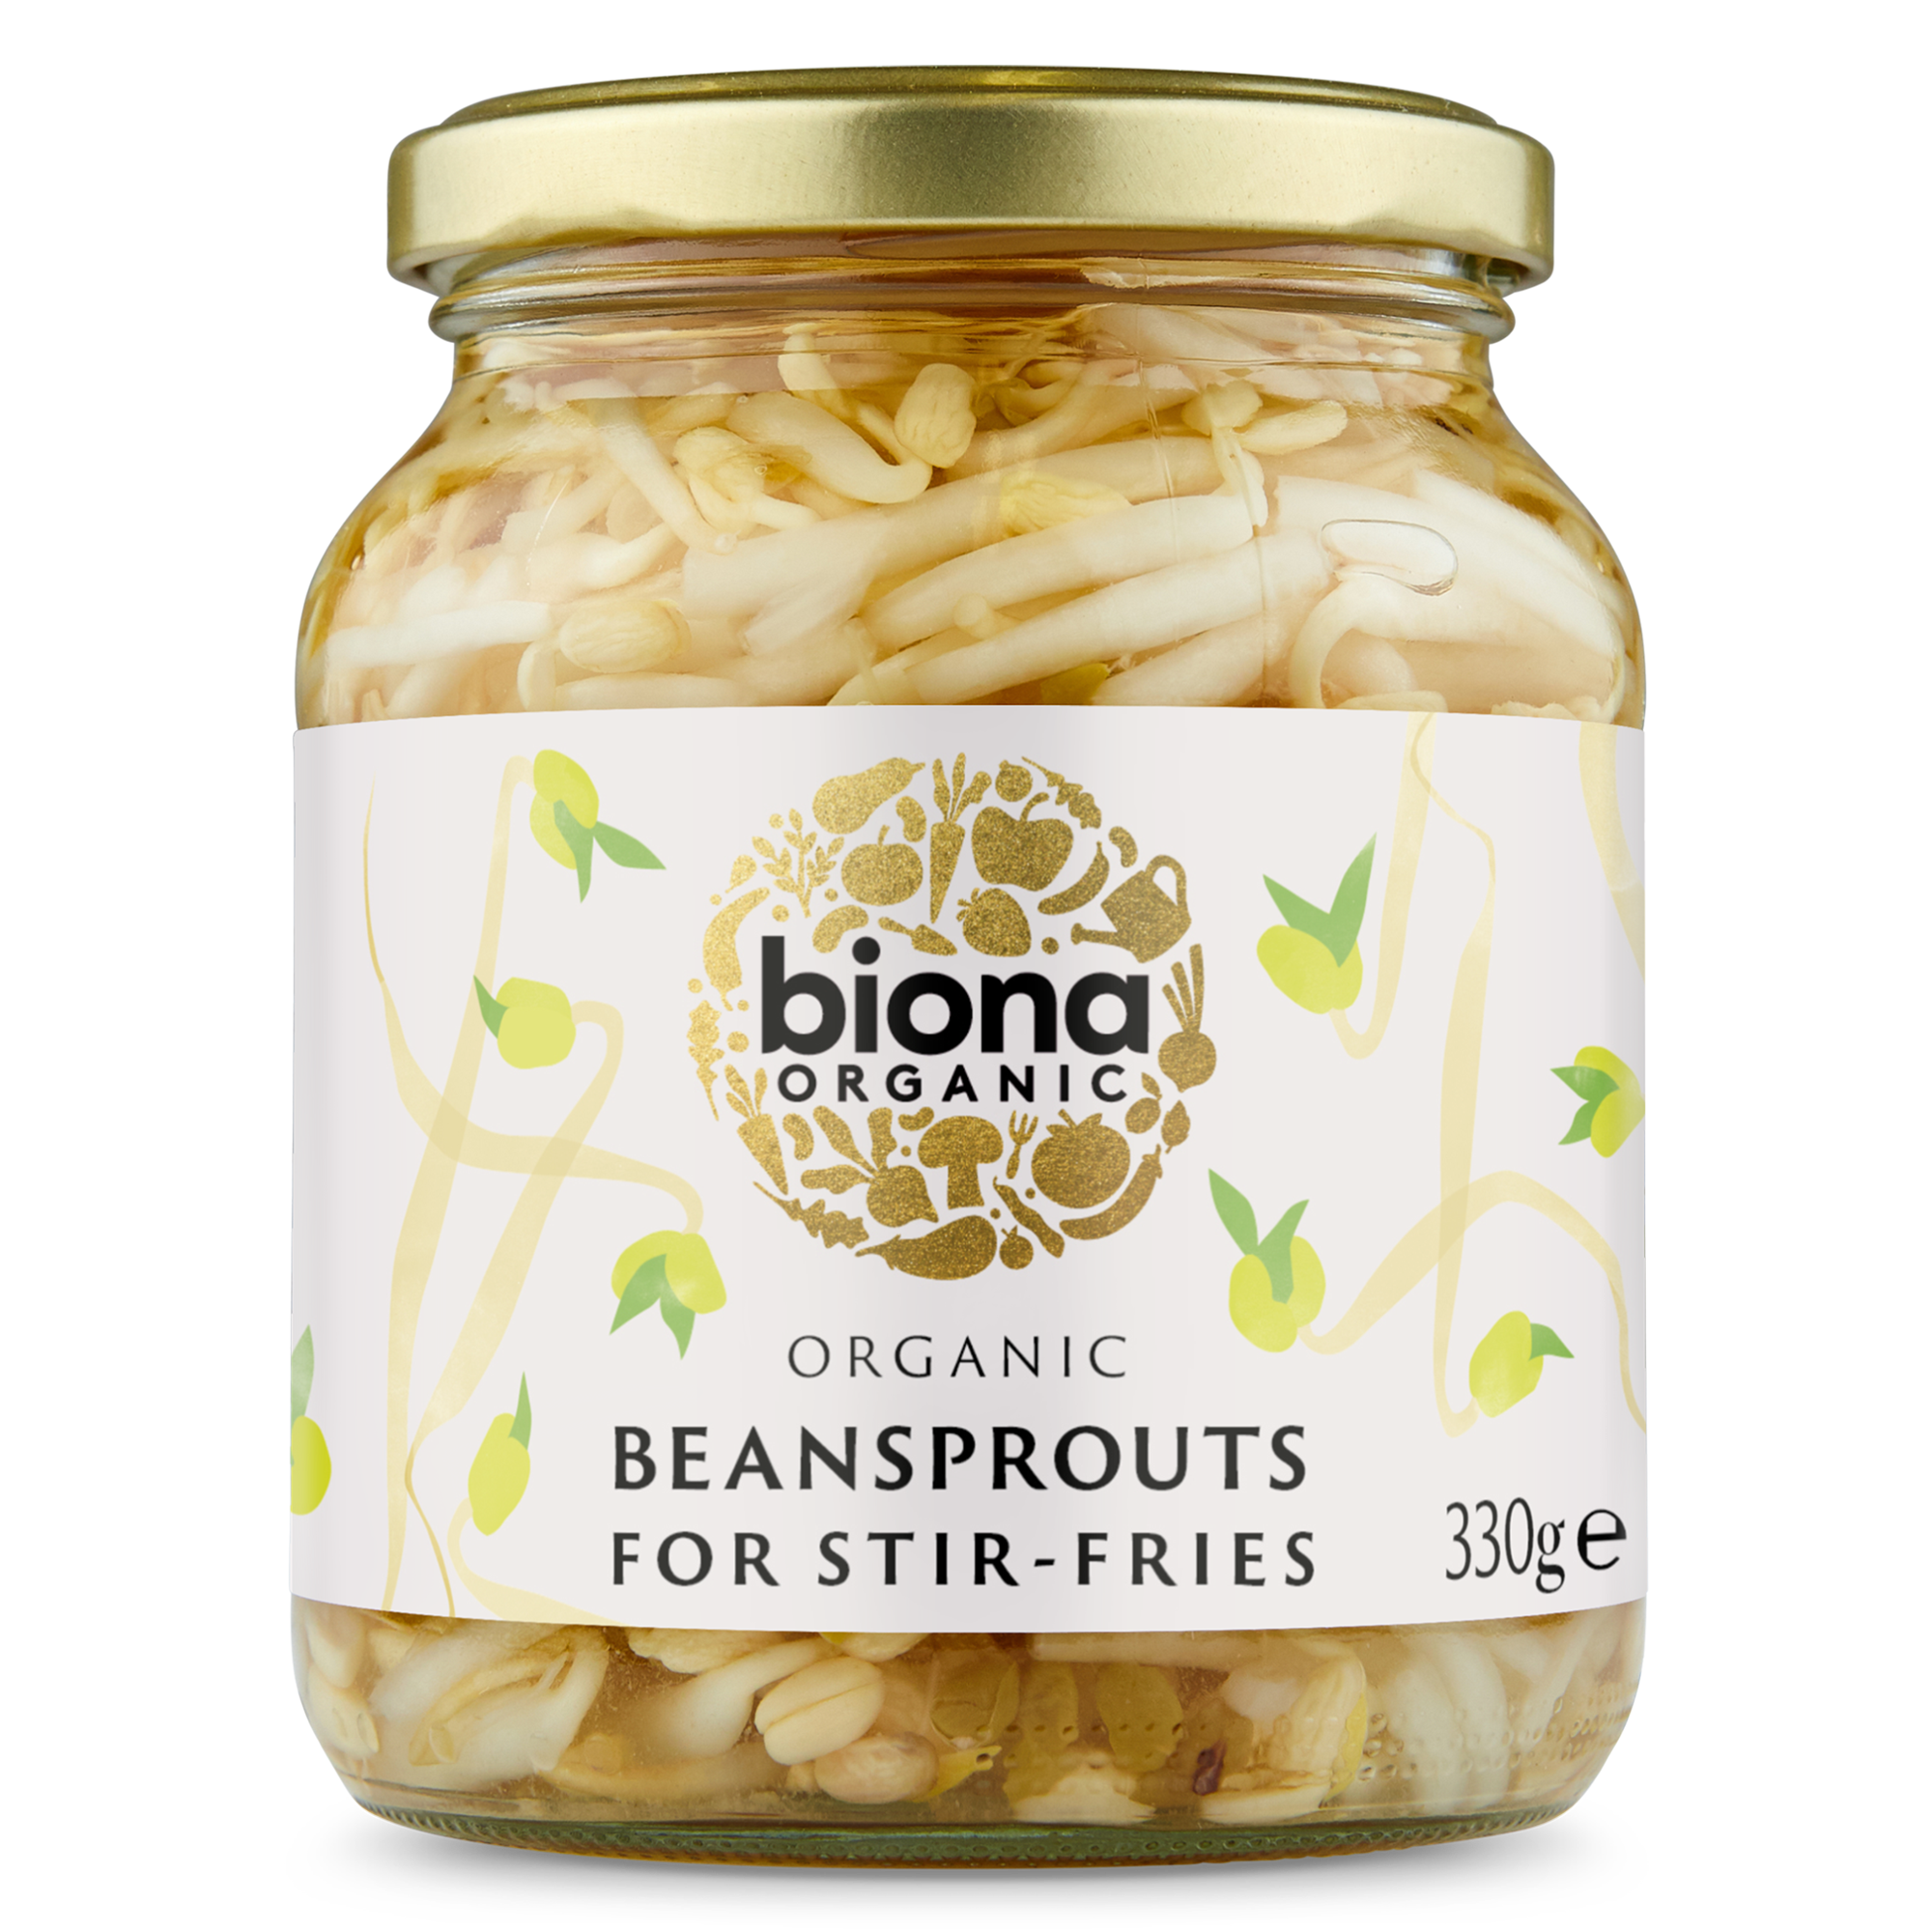 BEANSPROUTS